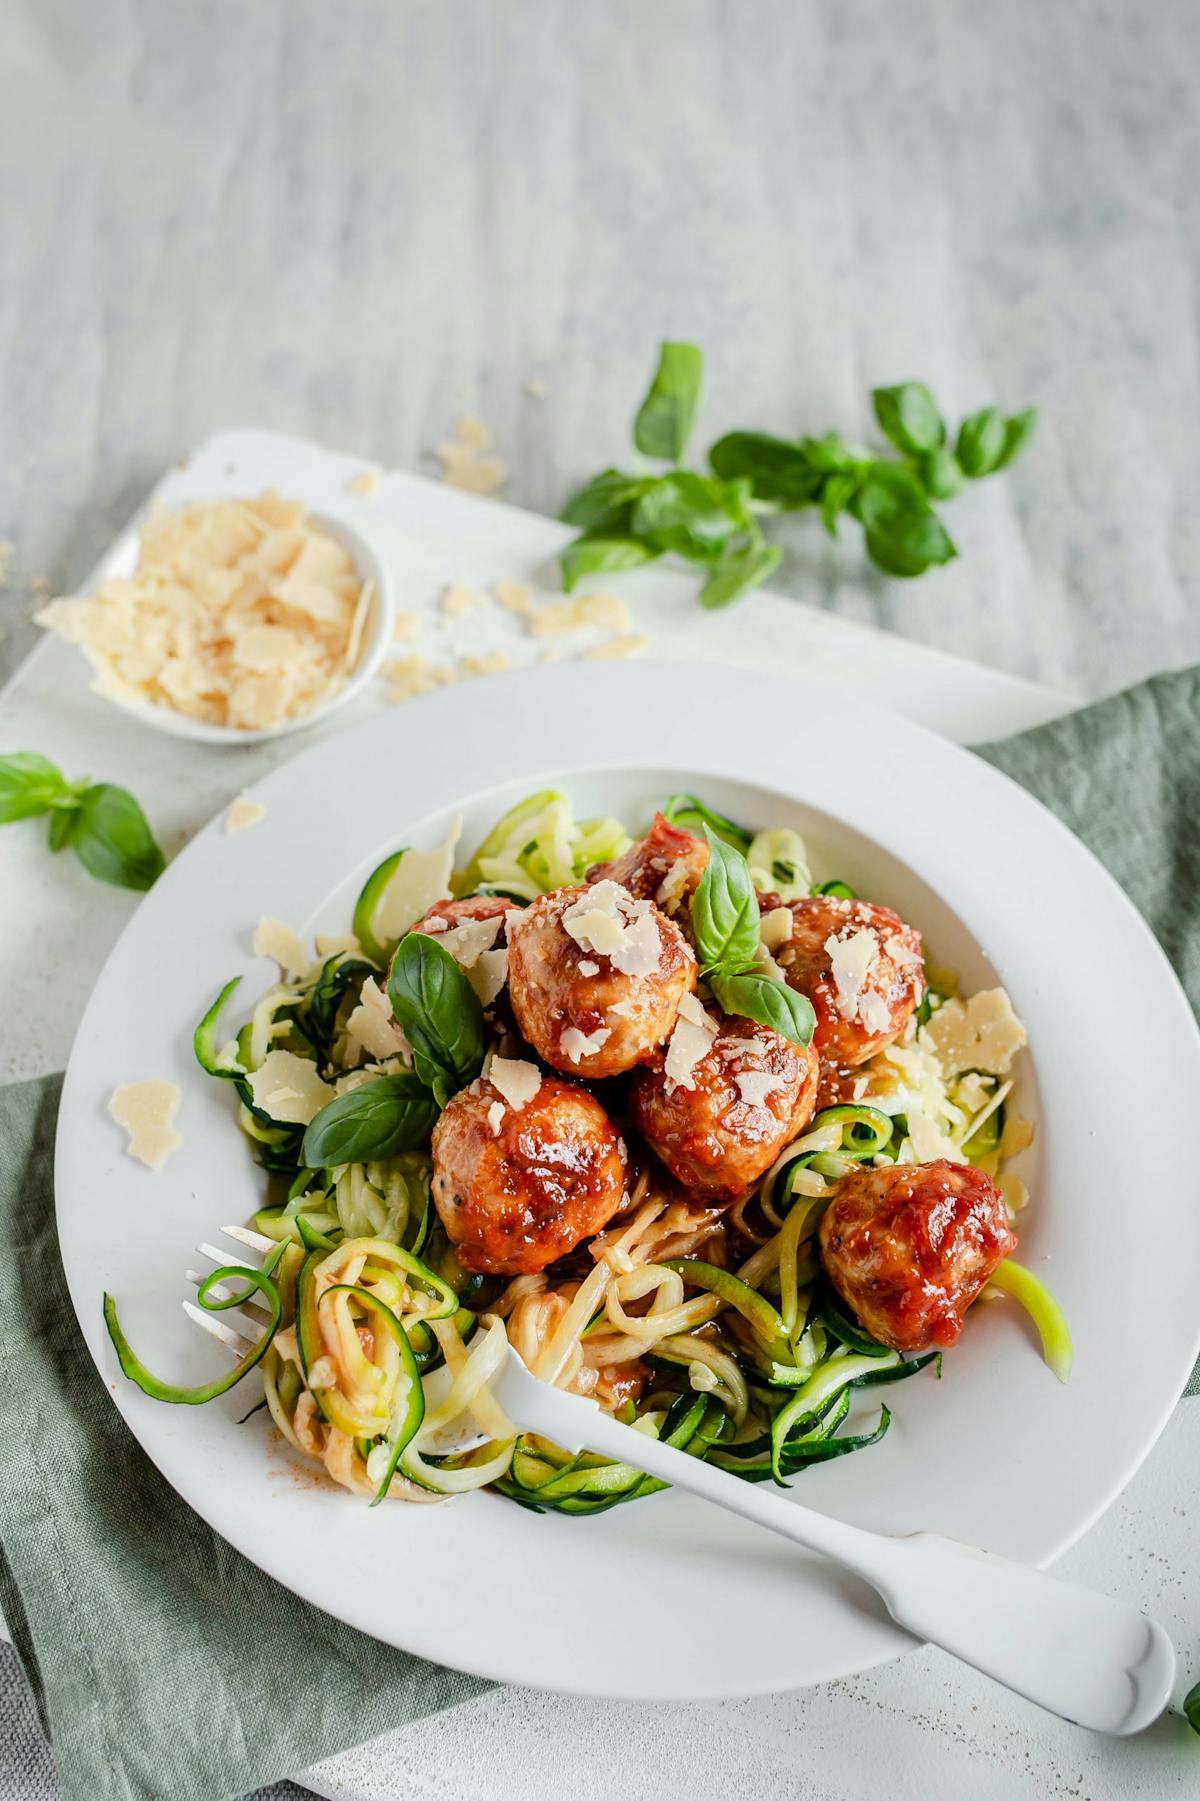 Low-carb and keto pasta recipes